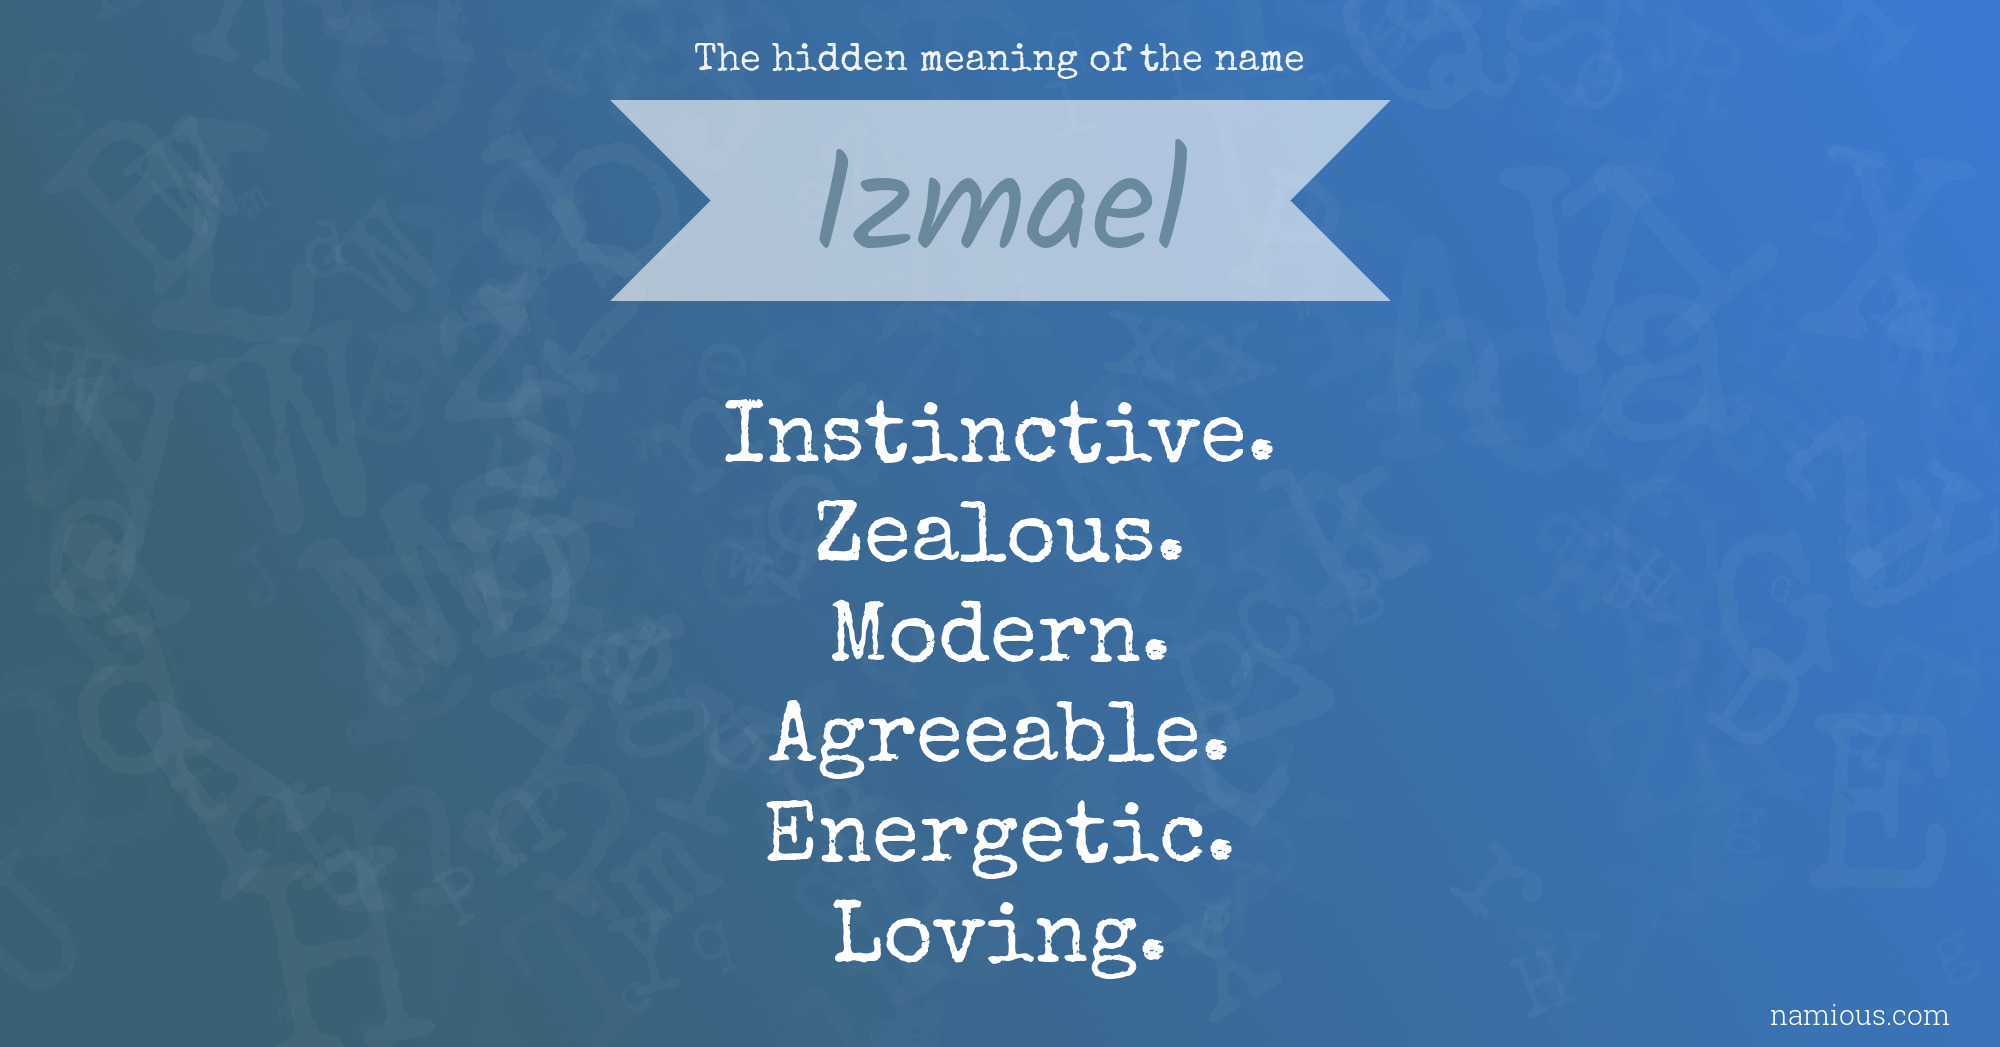 The hidden meaning of the name Izmael